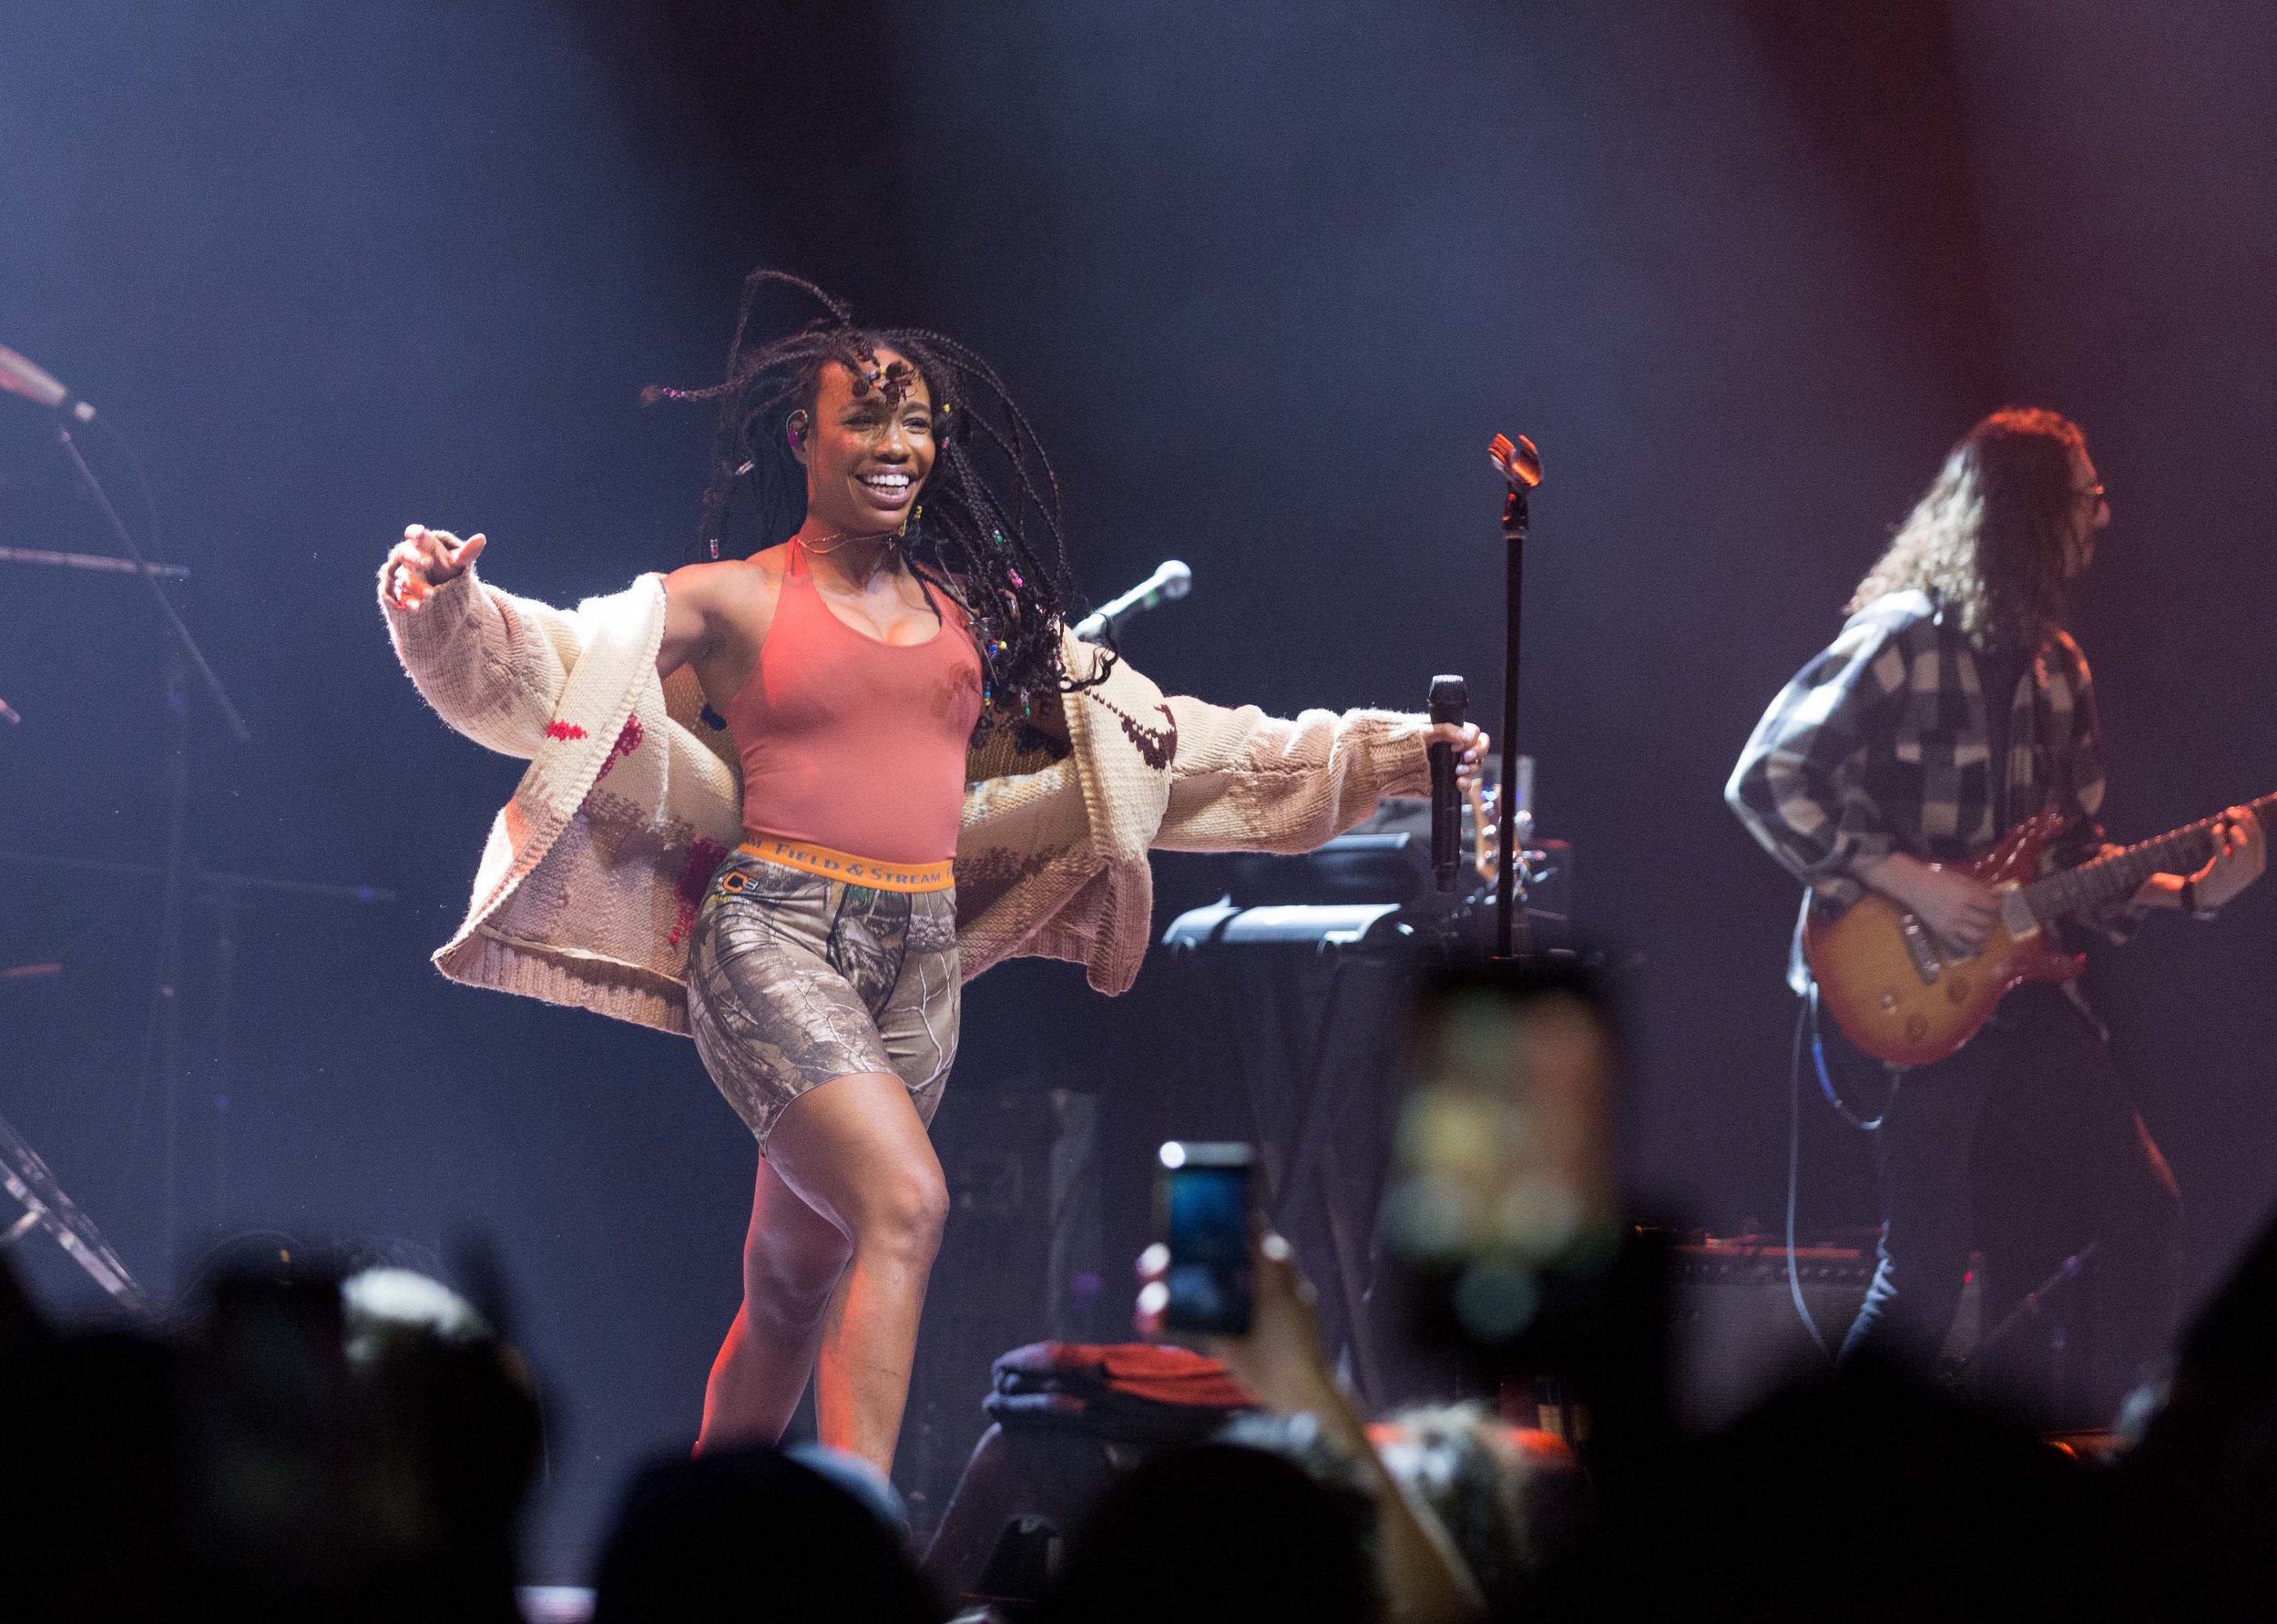  American R&amp;B singer Solána Imani Rowe "SZA" dances on stage during her performance of "Broken Clocks" off of her debut album "Ctrl" at the Novo in Los Angeles, Calif. on Tuesday, November 14th 2017. The show was not originally on SZA's "Ctrl" to